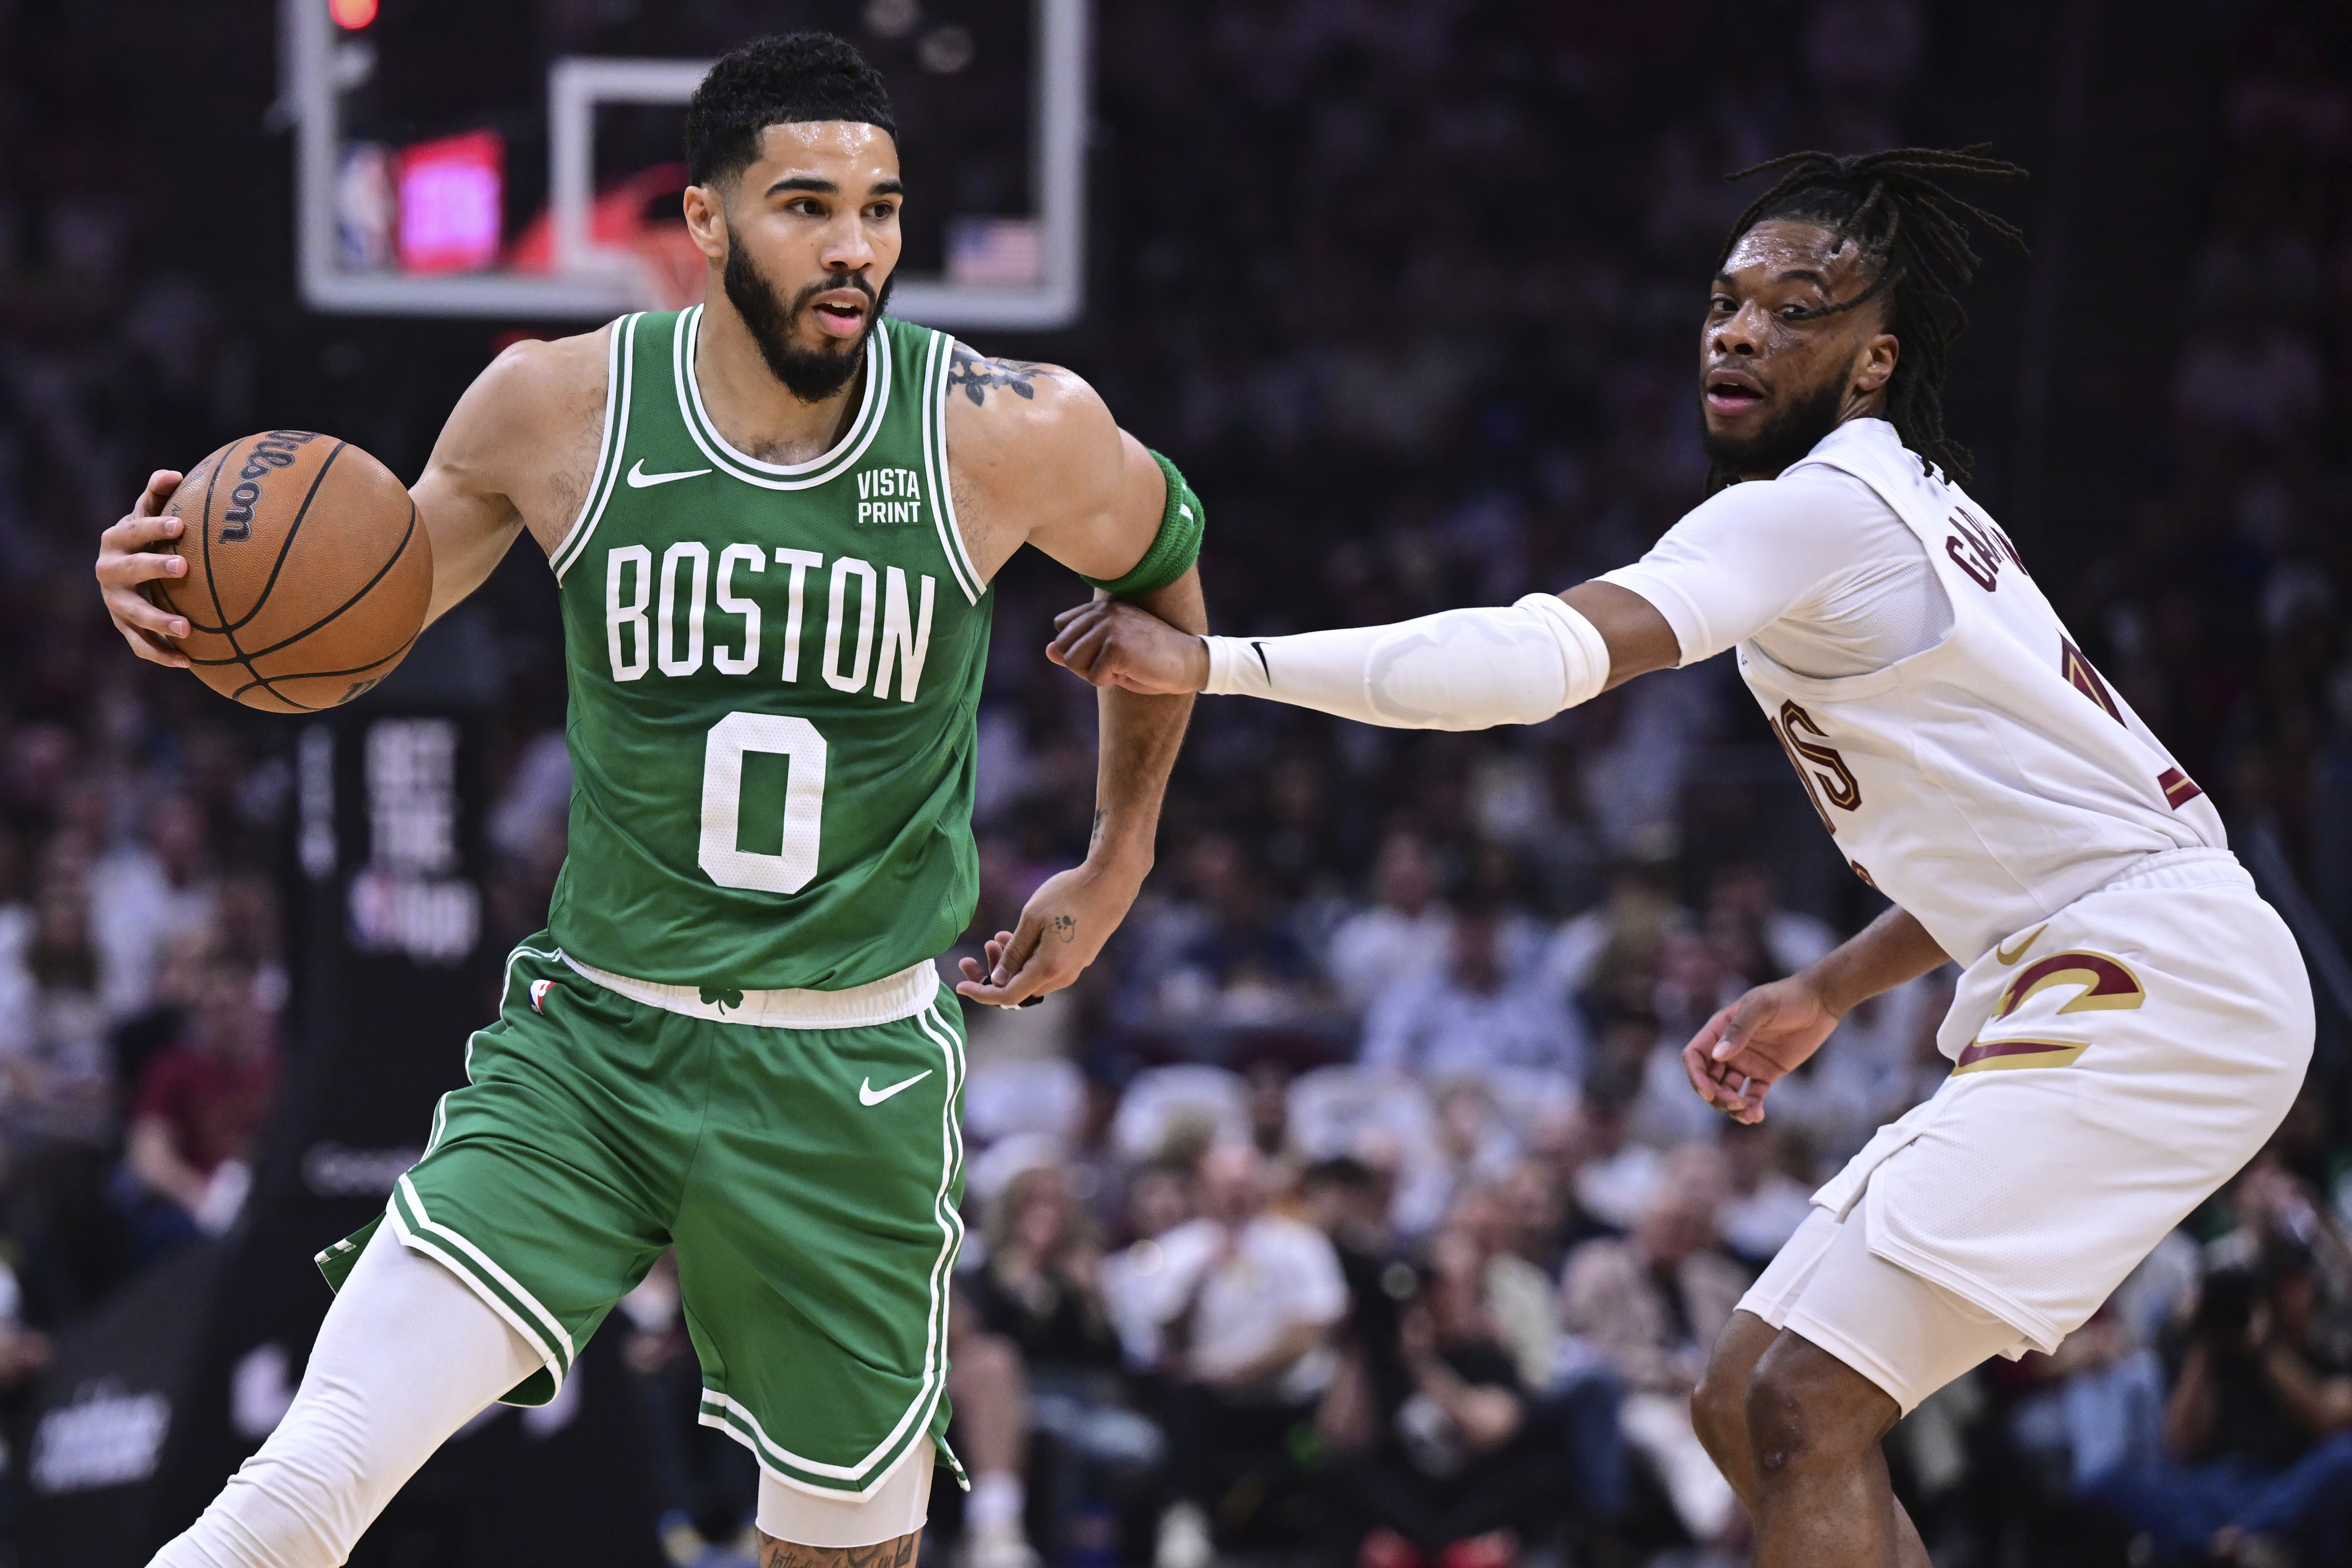 NBA playoffs: Celtics take 3-1 series lead over Cavs, who were missing Donovan Mitchell